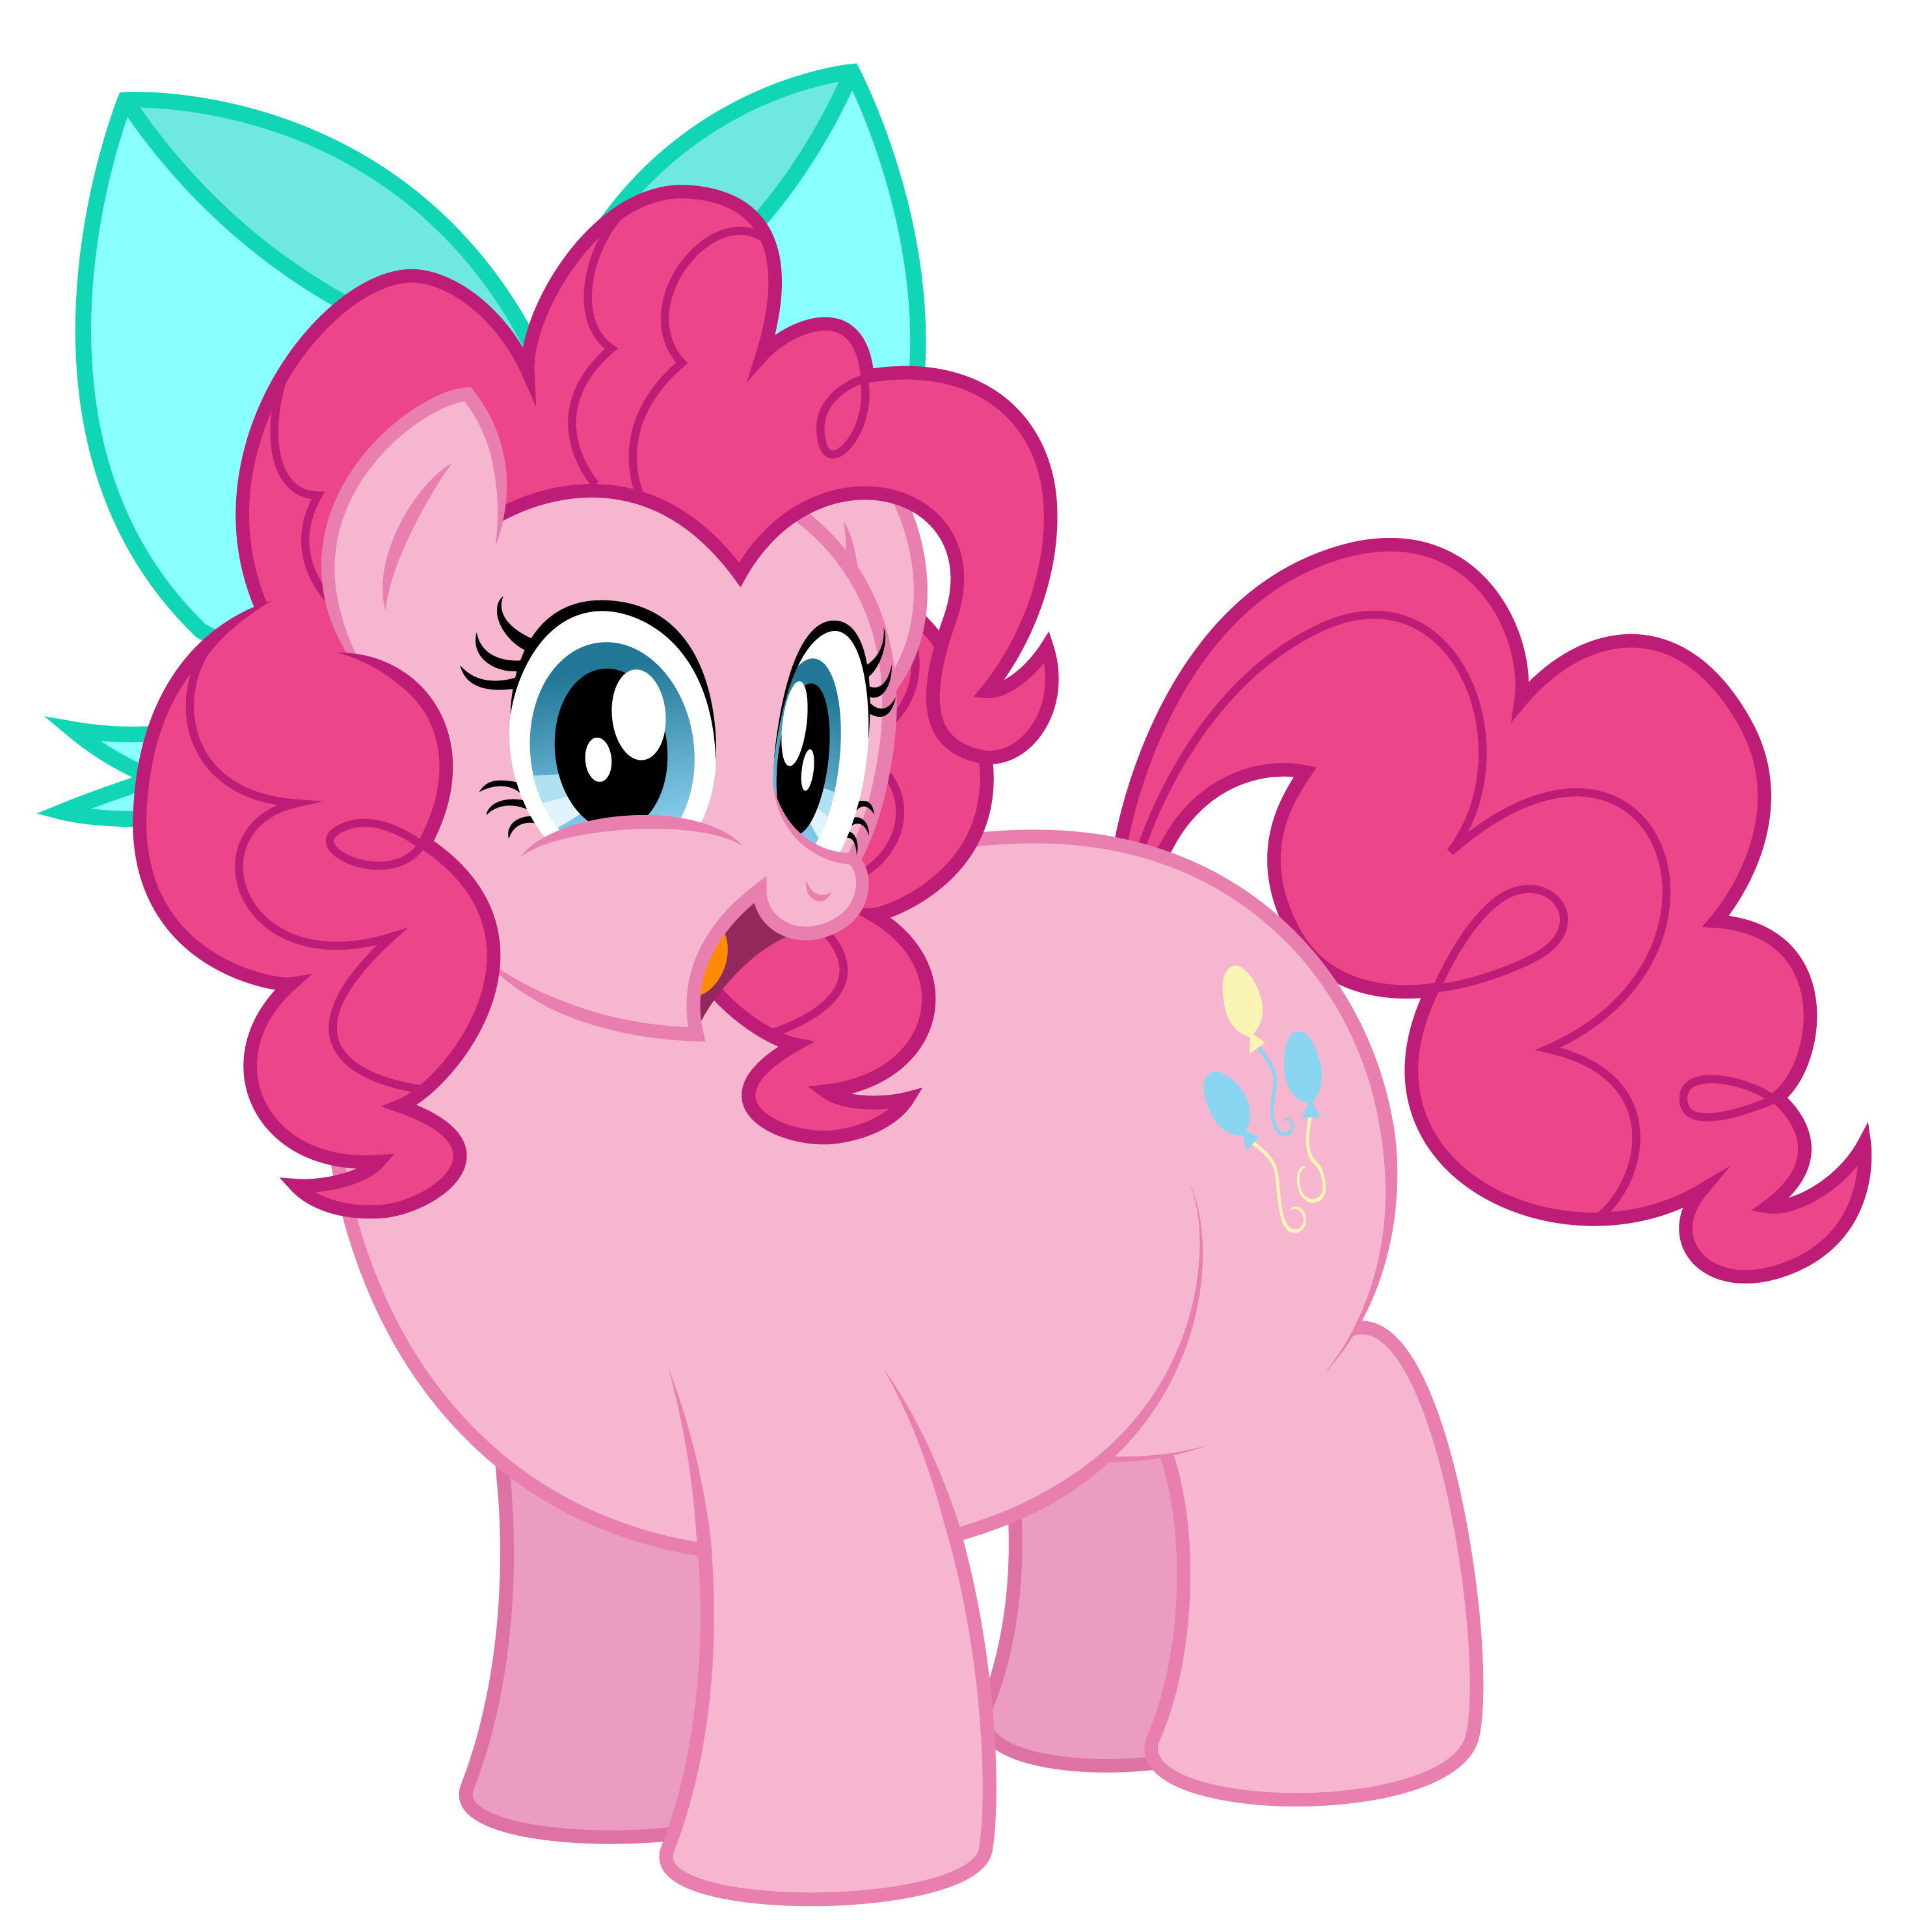 Pinkie Pie 10 years later by AleximusPrime on DeviantArt